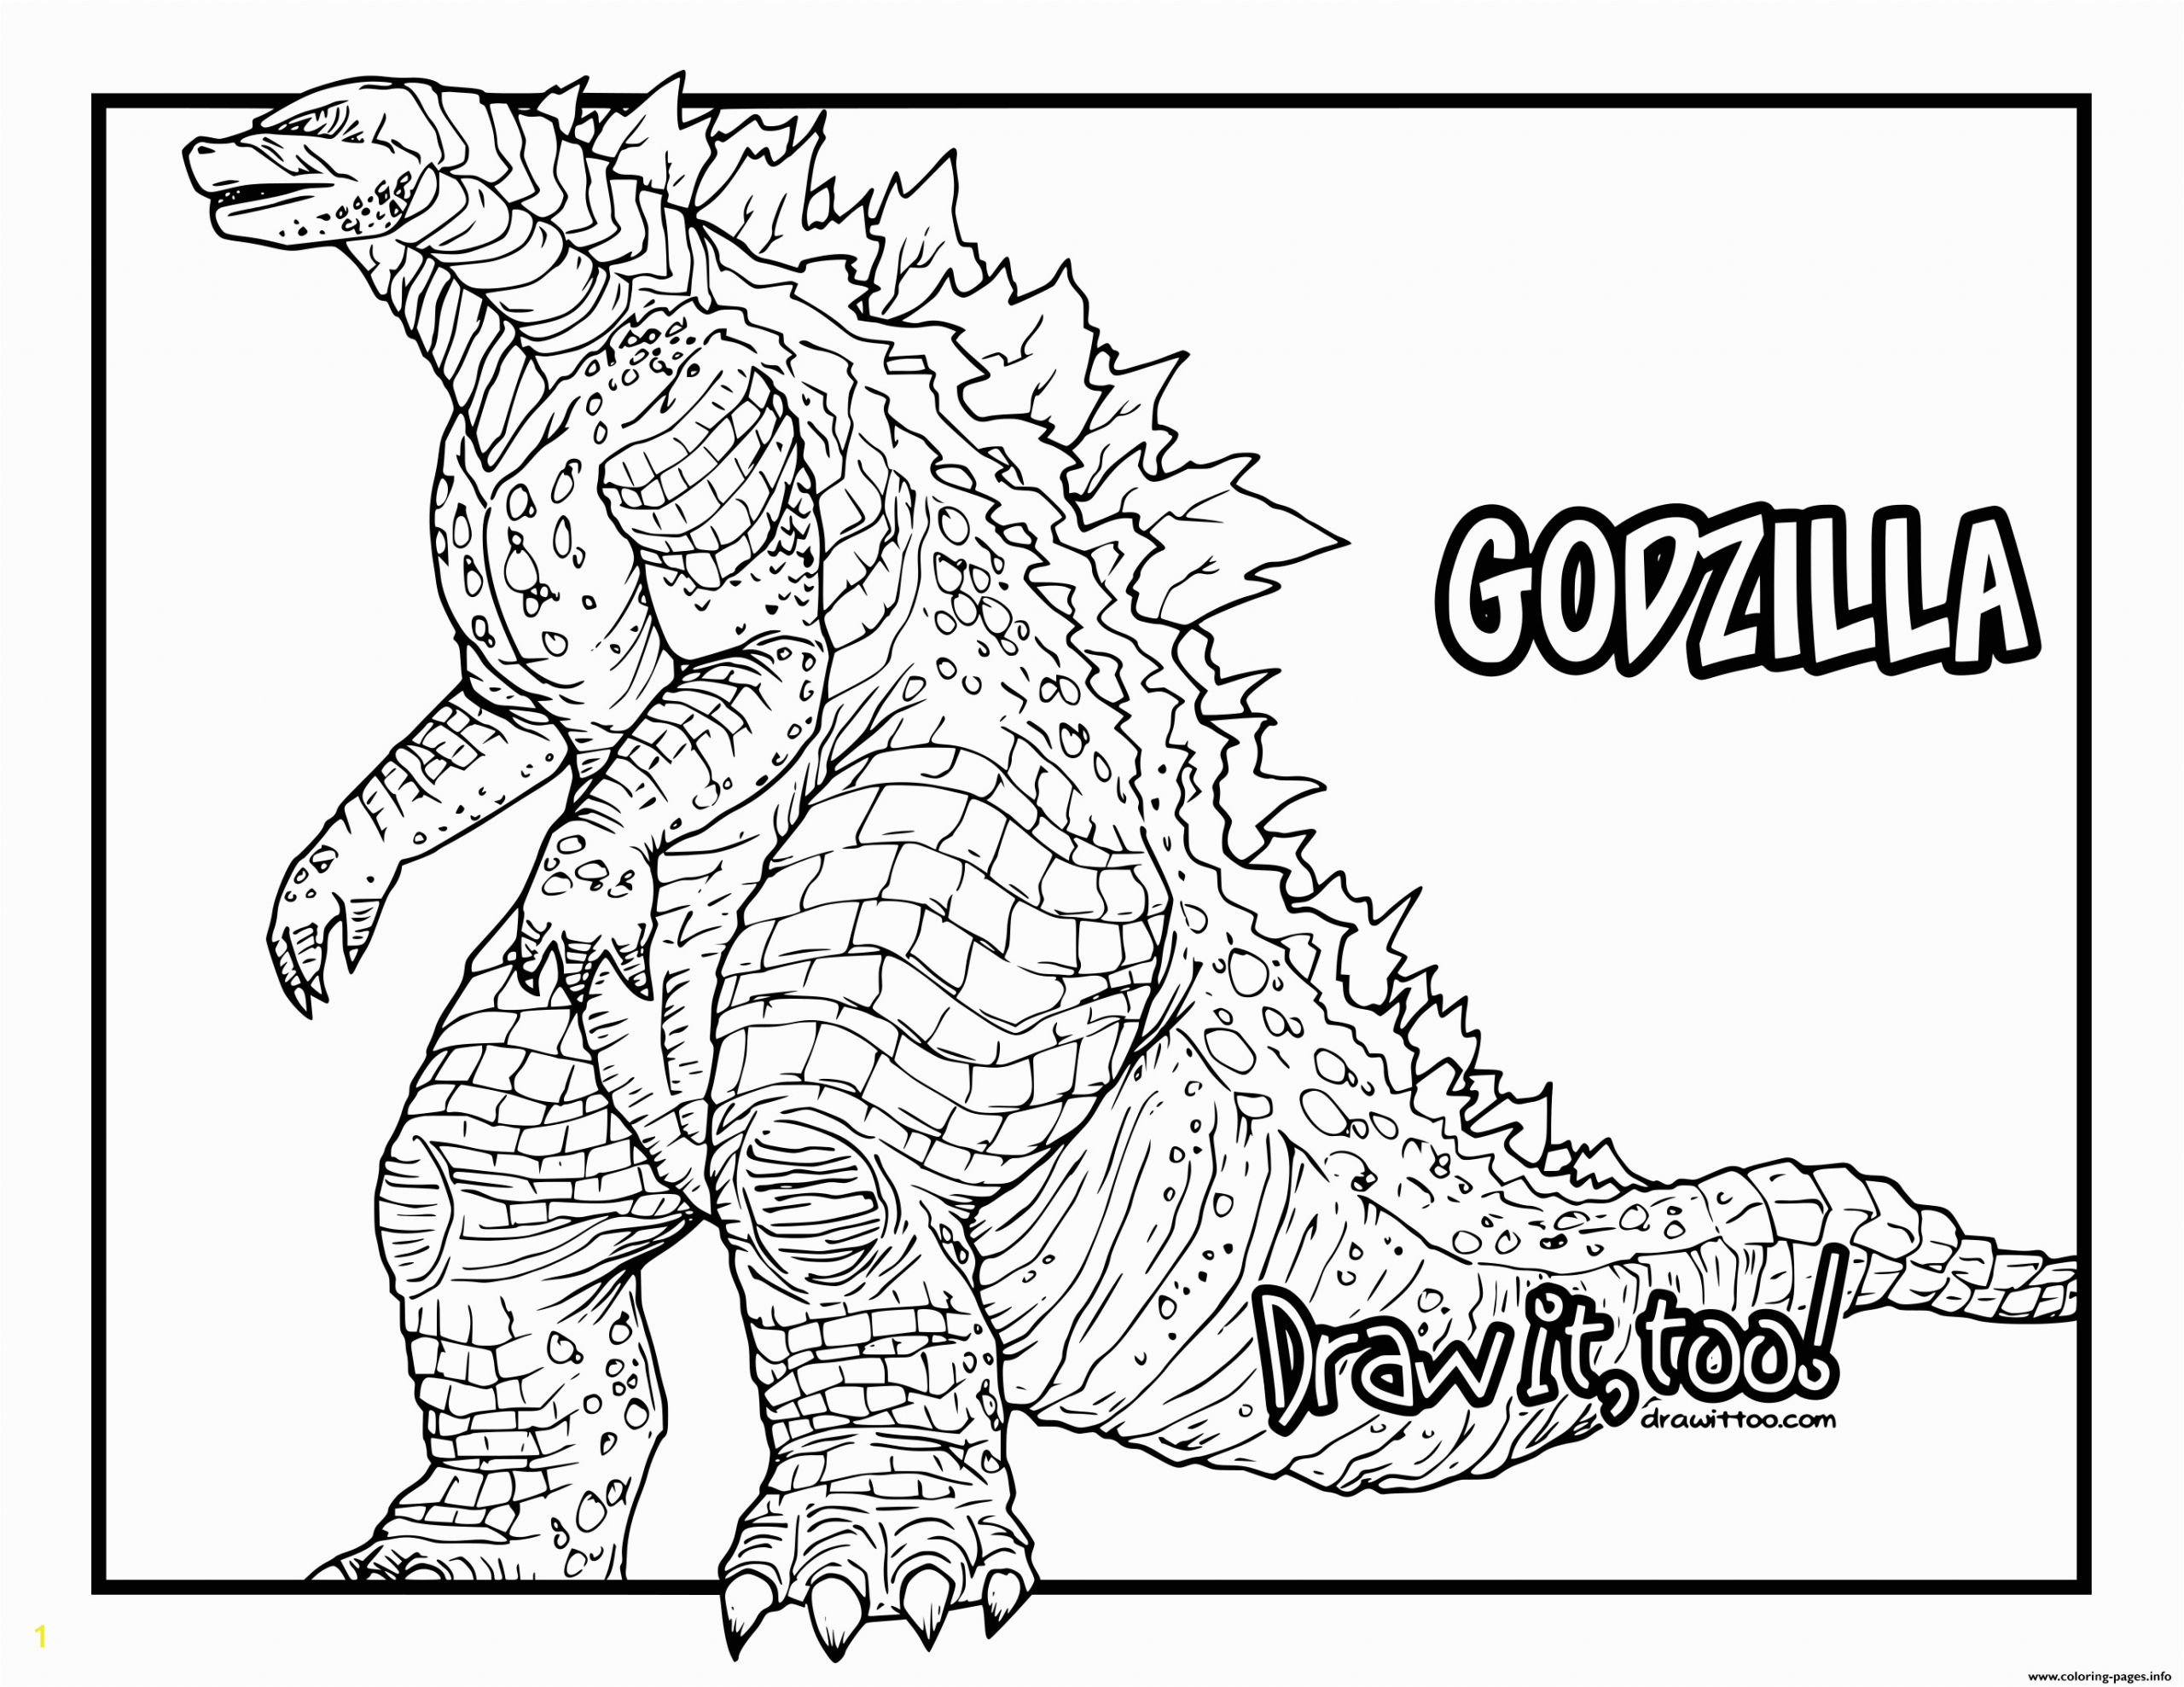 Godzilla King Of the Monsters Coloring Pages 2019 Godzilla An Enormous Destrructive Coloring Pages Printable